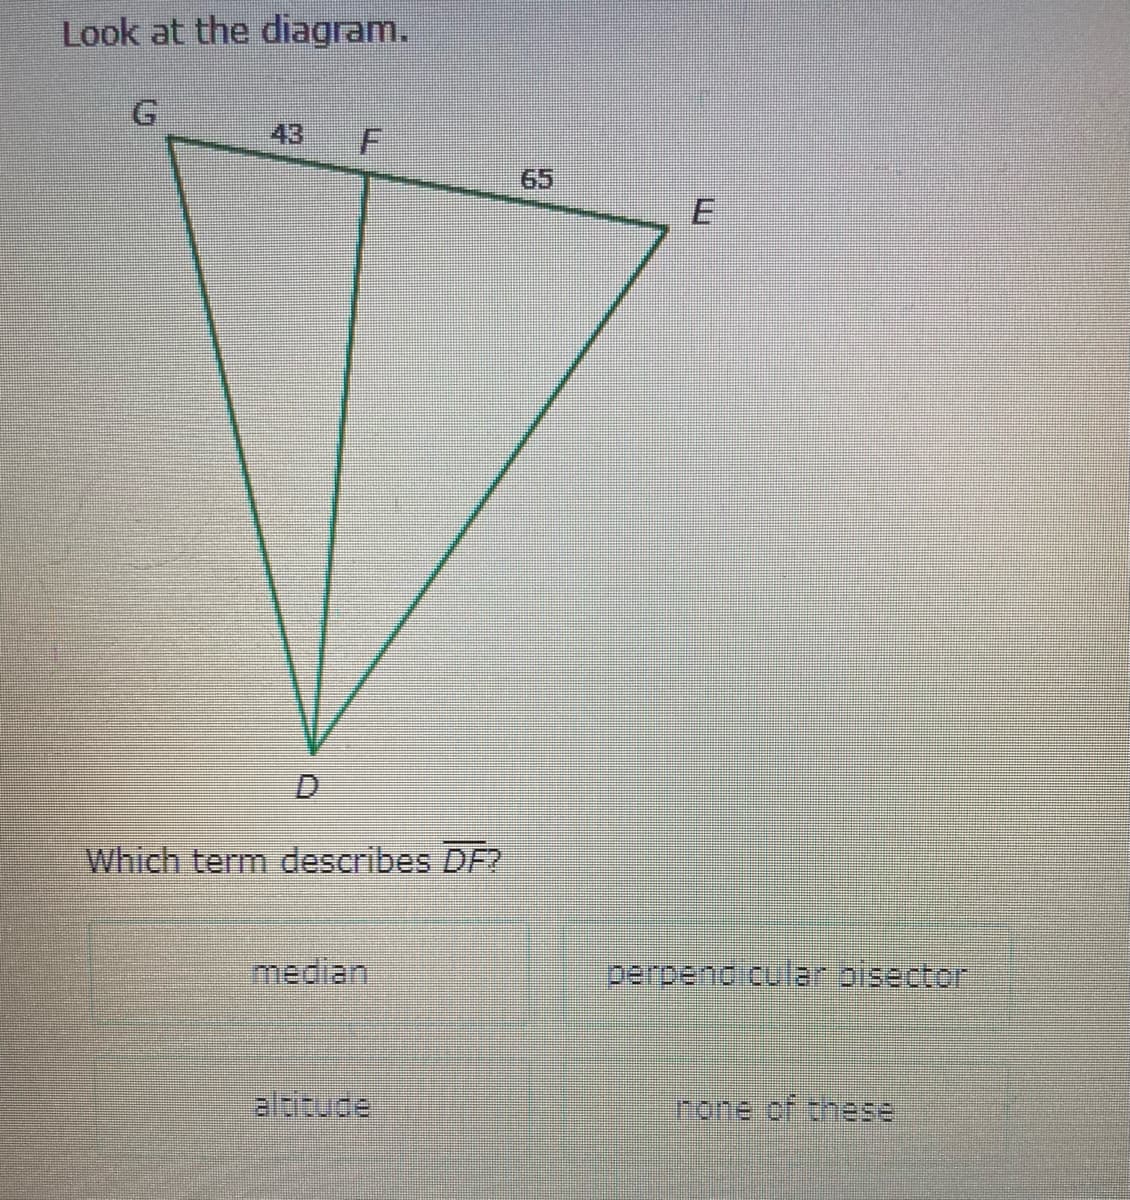 Look at the diagram.
G
43
65
Which term describes DF?
median
perpendicular bisector
altitude
none of these
